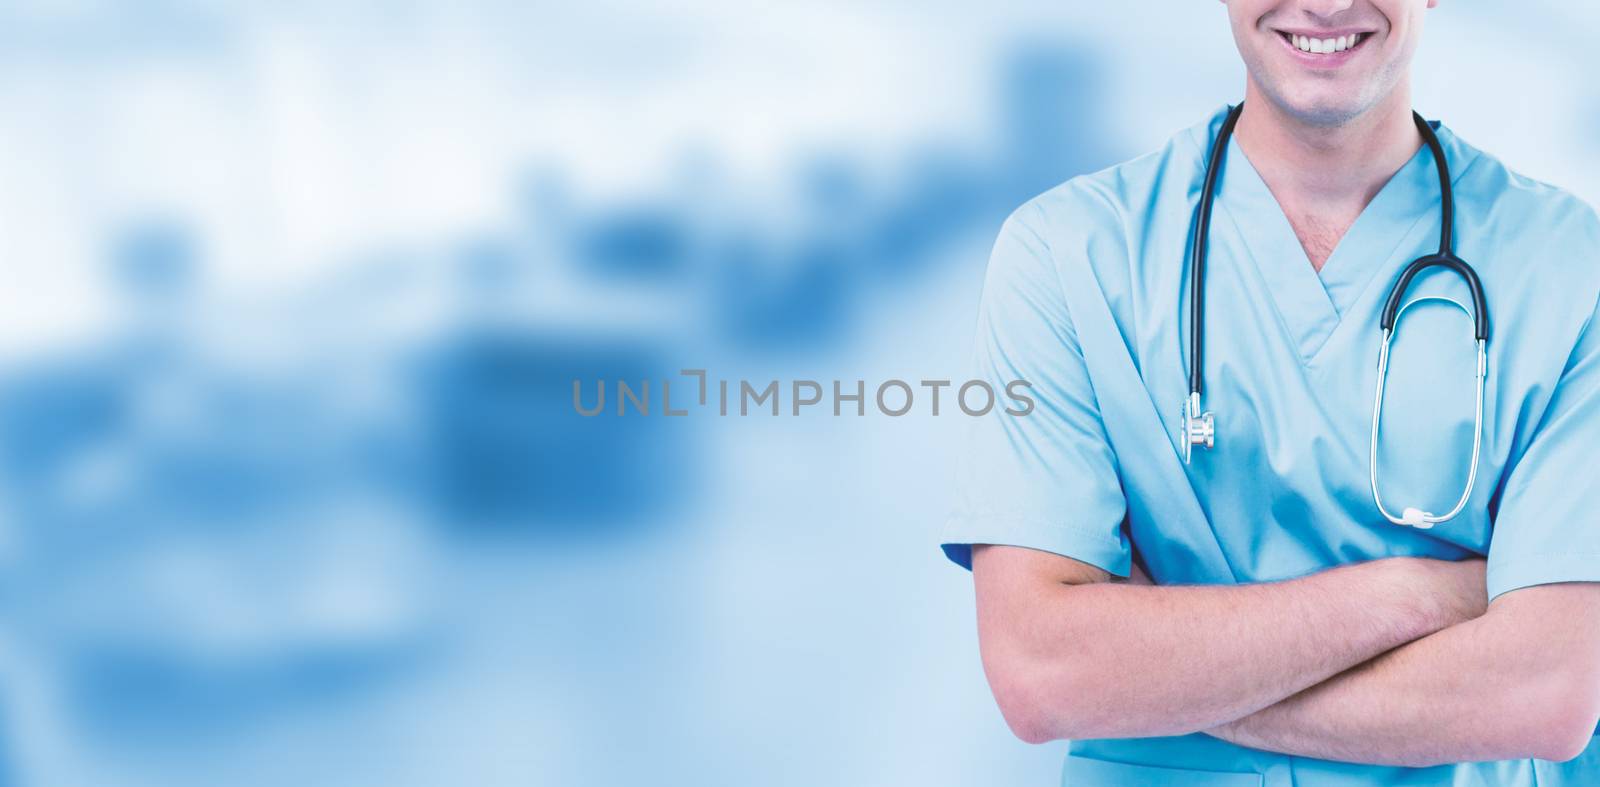 Composite image of portrait of male surgeon standing arms crossed by Wavebreakmedia